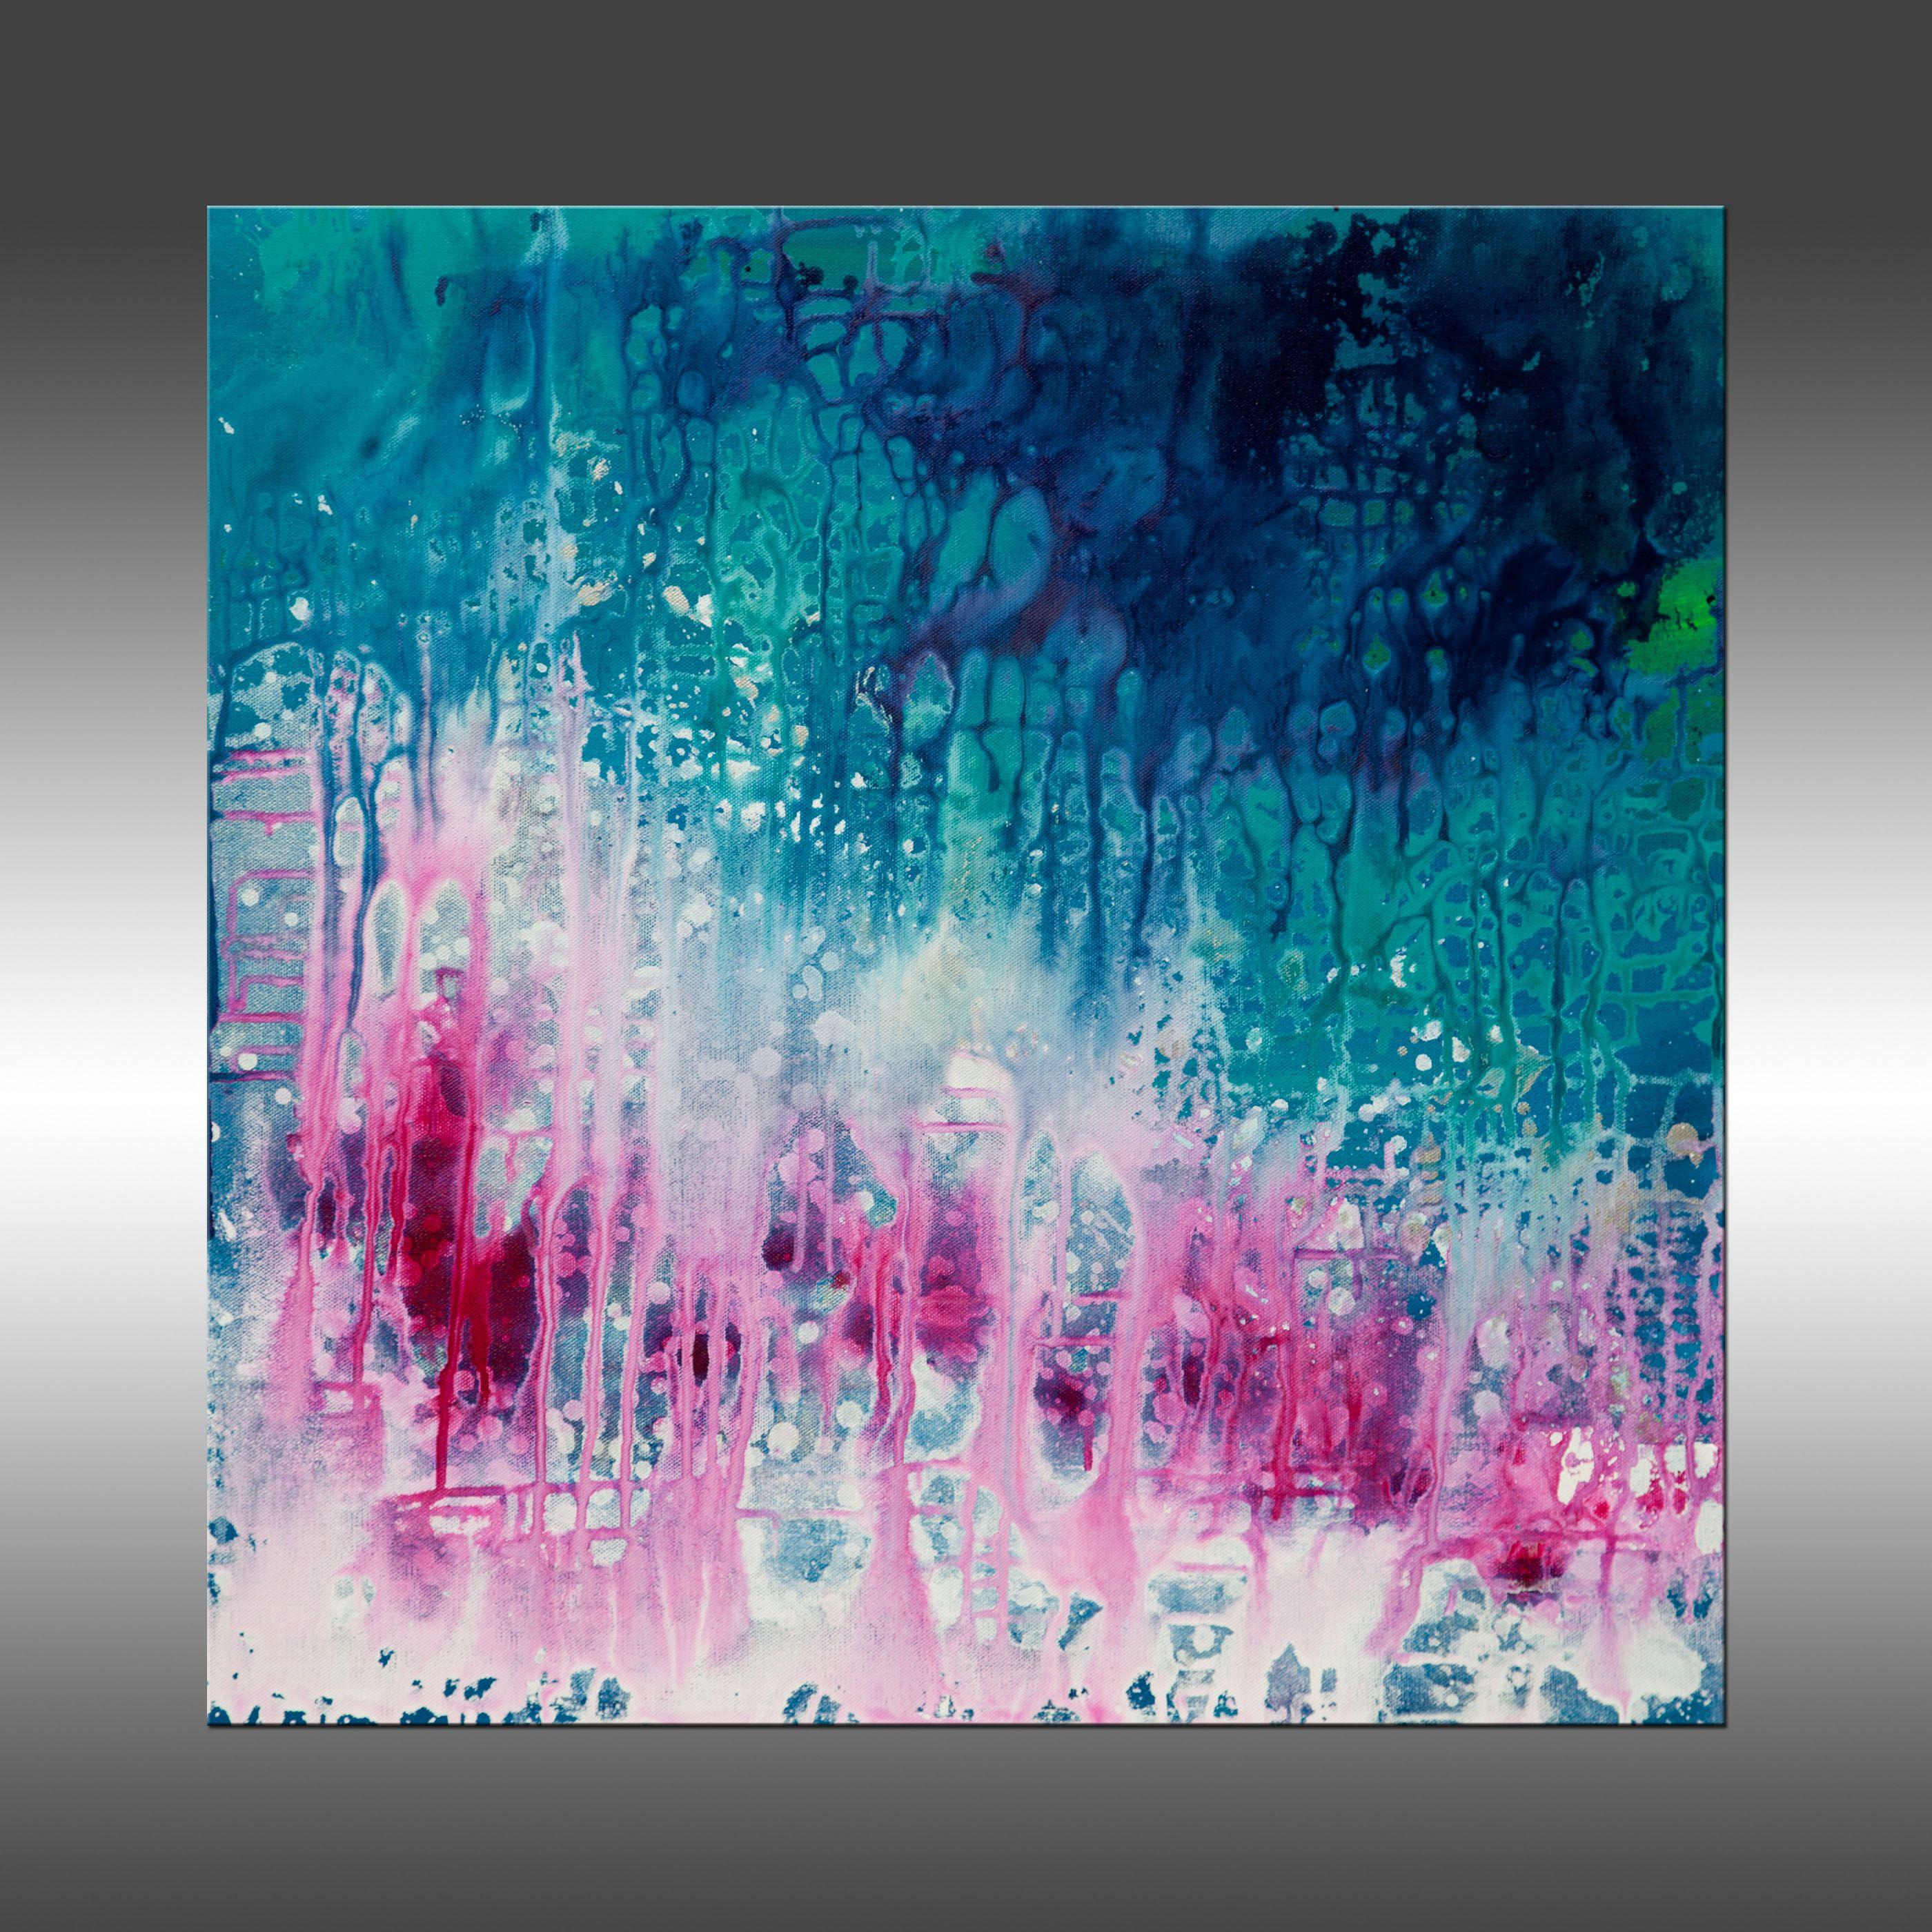 Connection is an original painting, created with acrylic paint on gallery-wrapped canvas. It has a width of 24 inches and a height of 24 inches with a depth of 1.5 inches (24x24x1.5).    The colors used in the painting are white, teal, fuchsia,